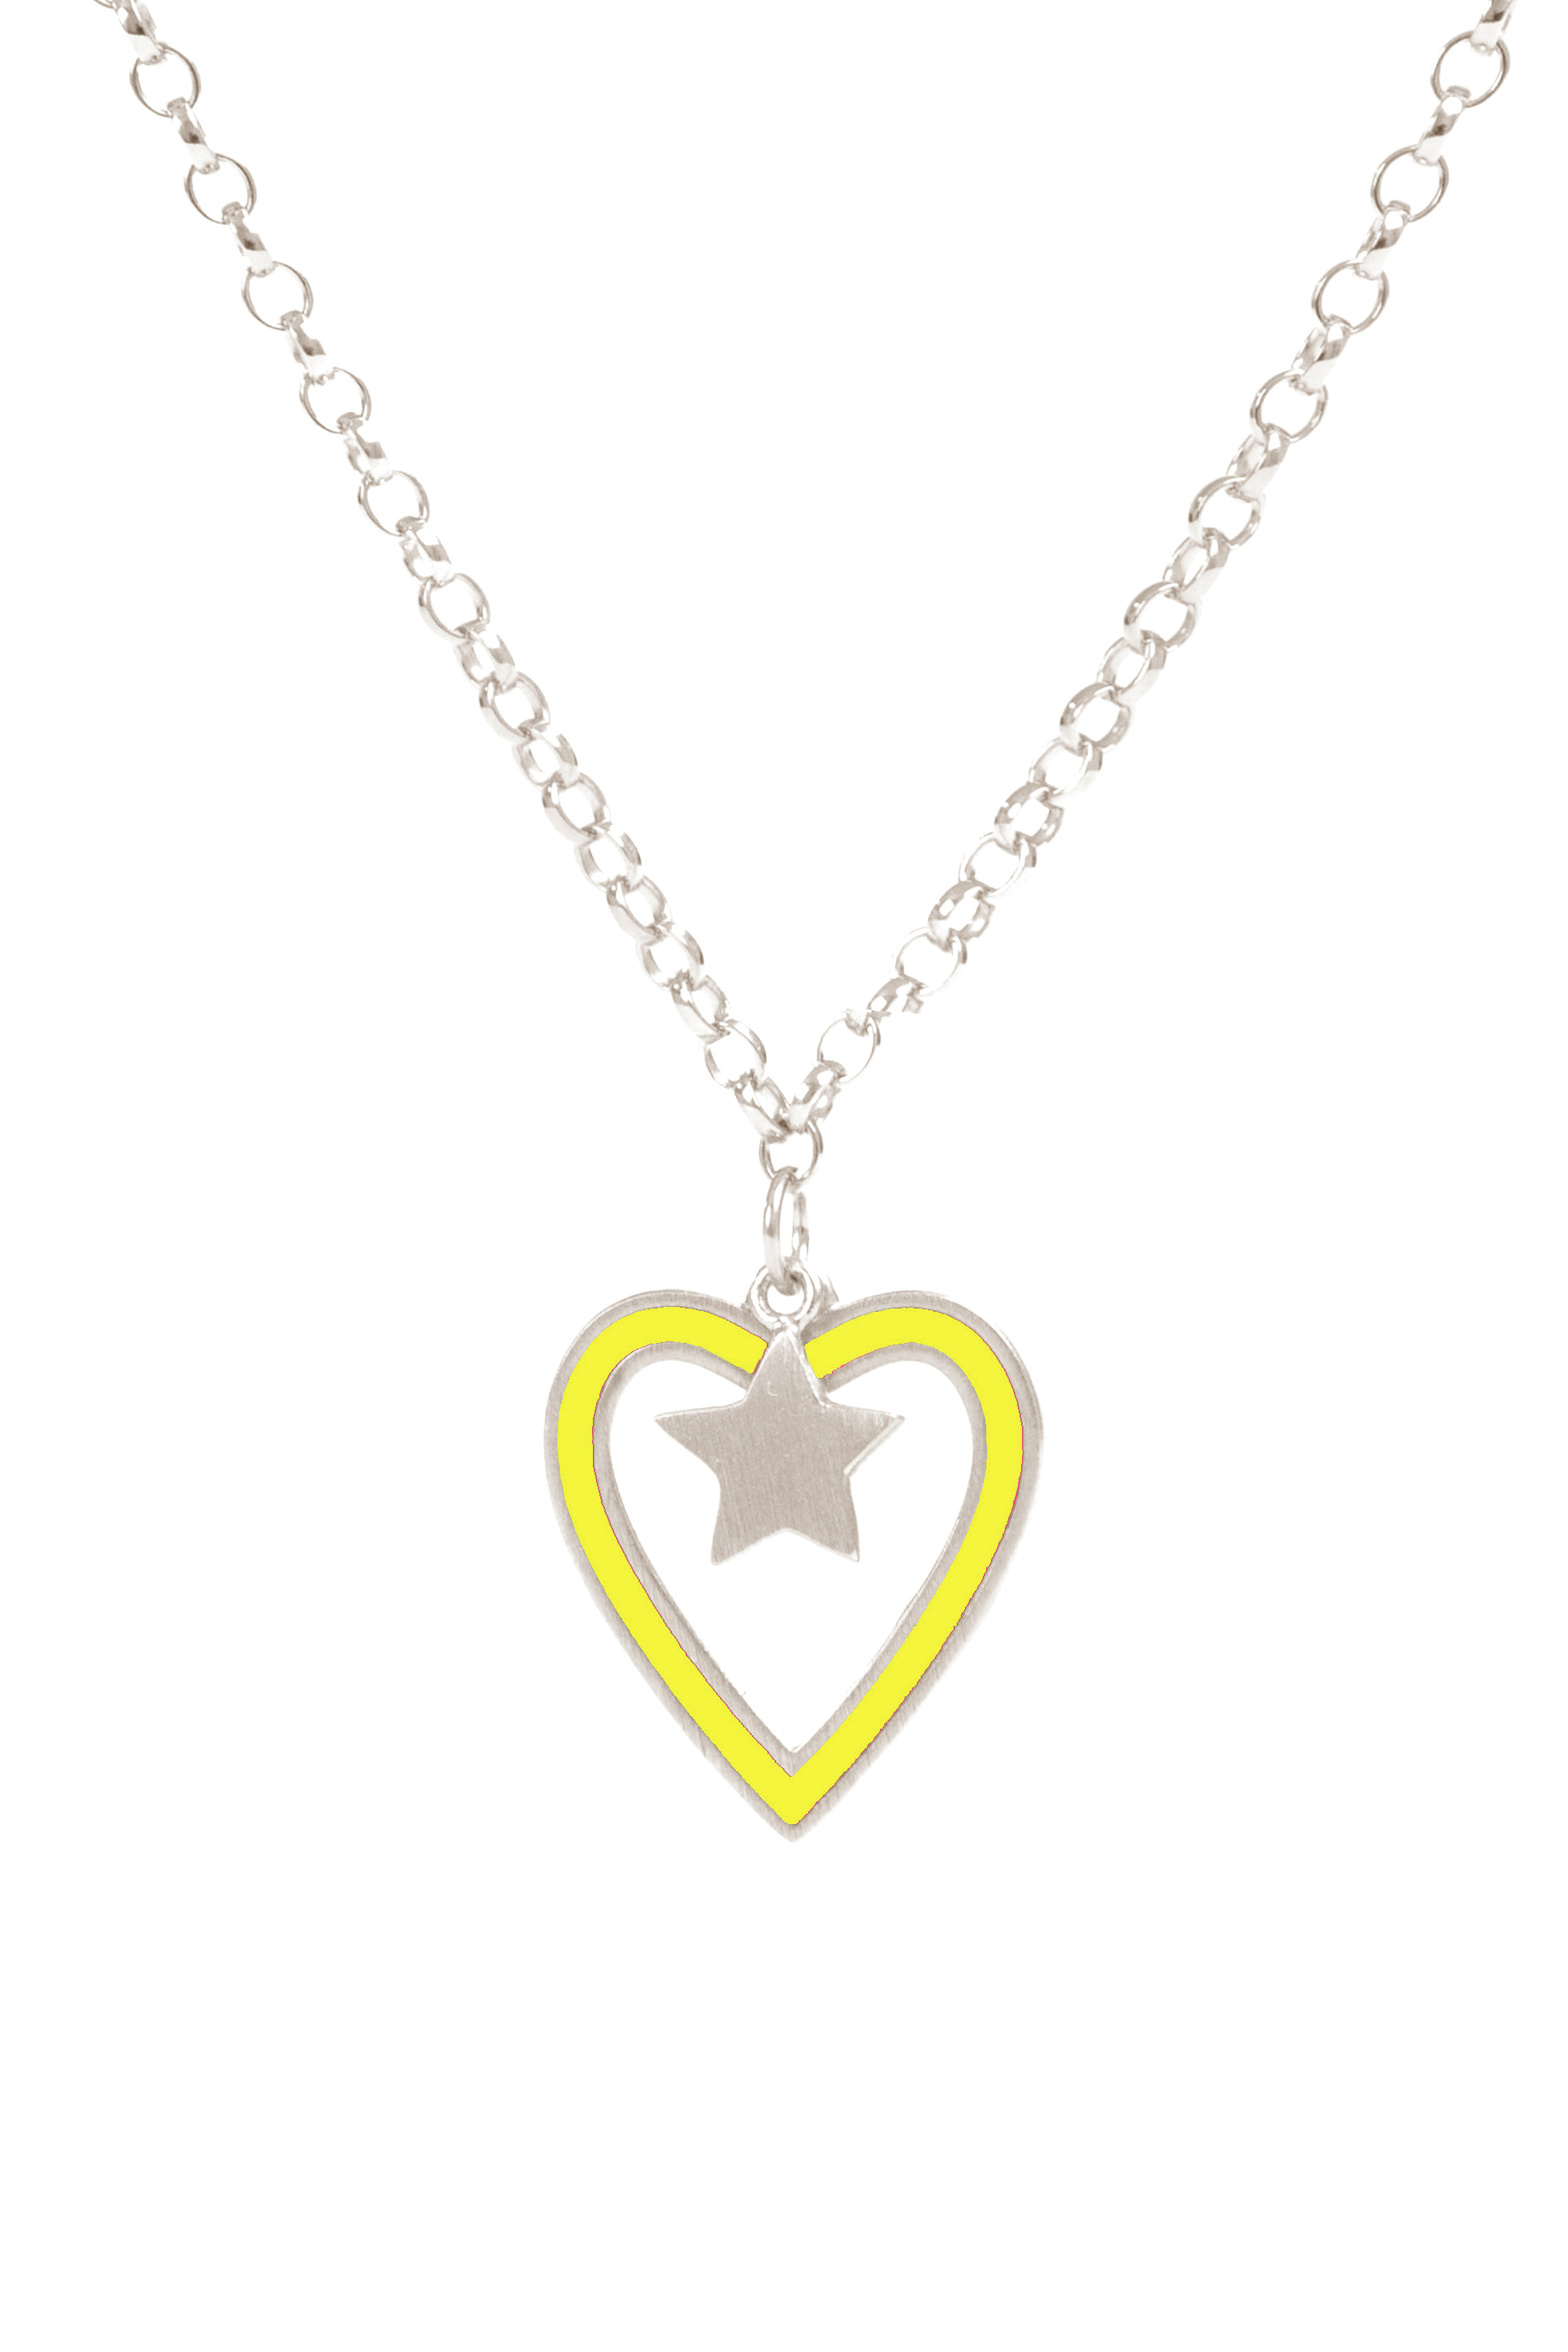 cb468_heart-necklace_silver_with_neon.jpg